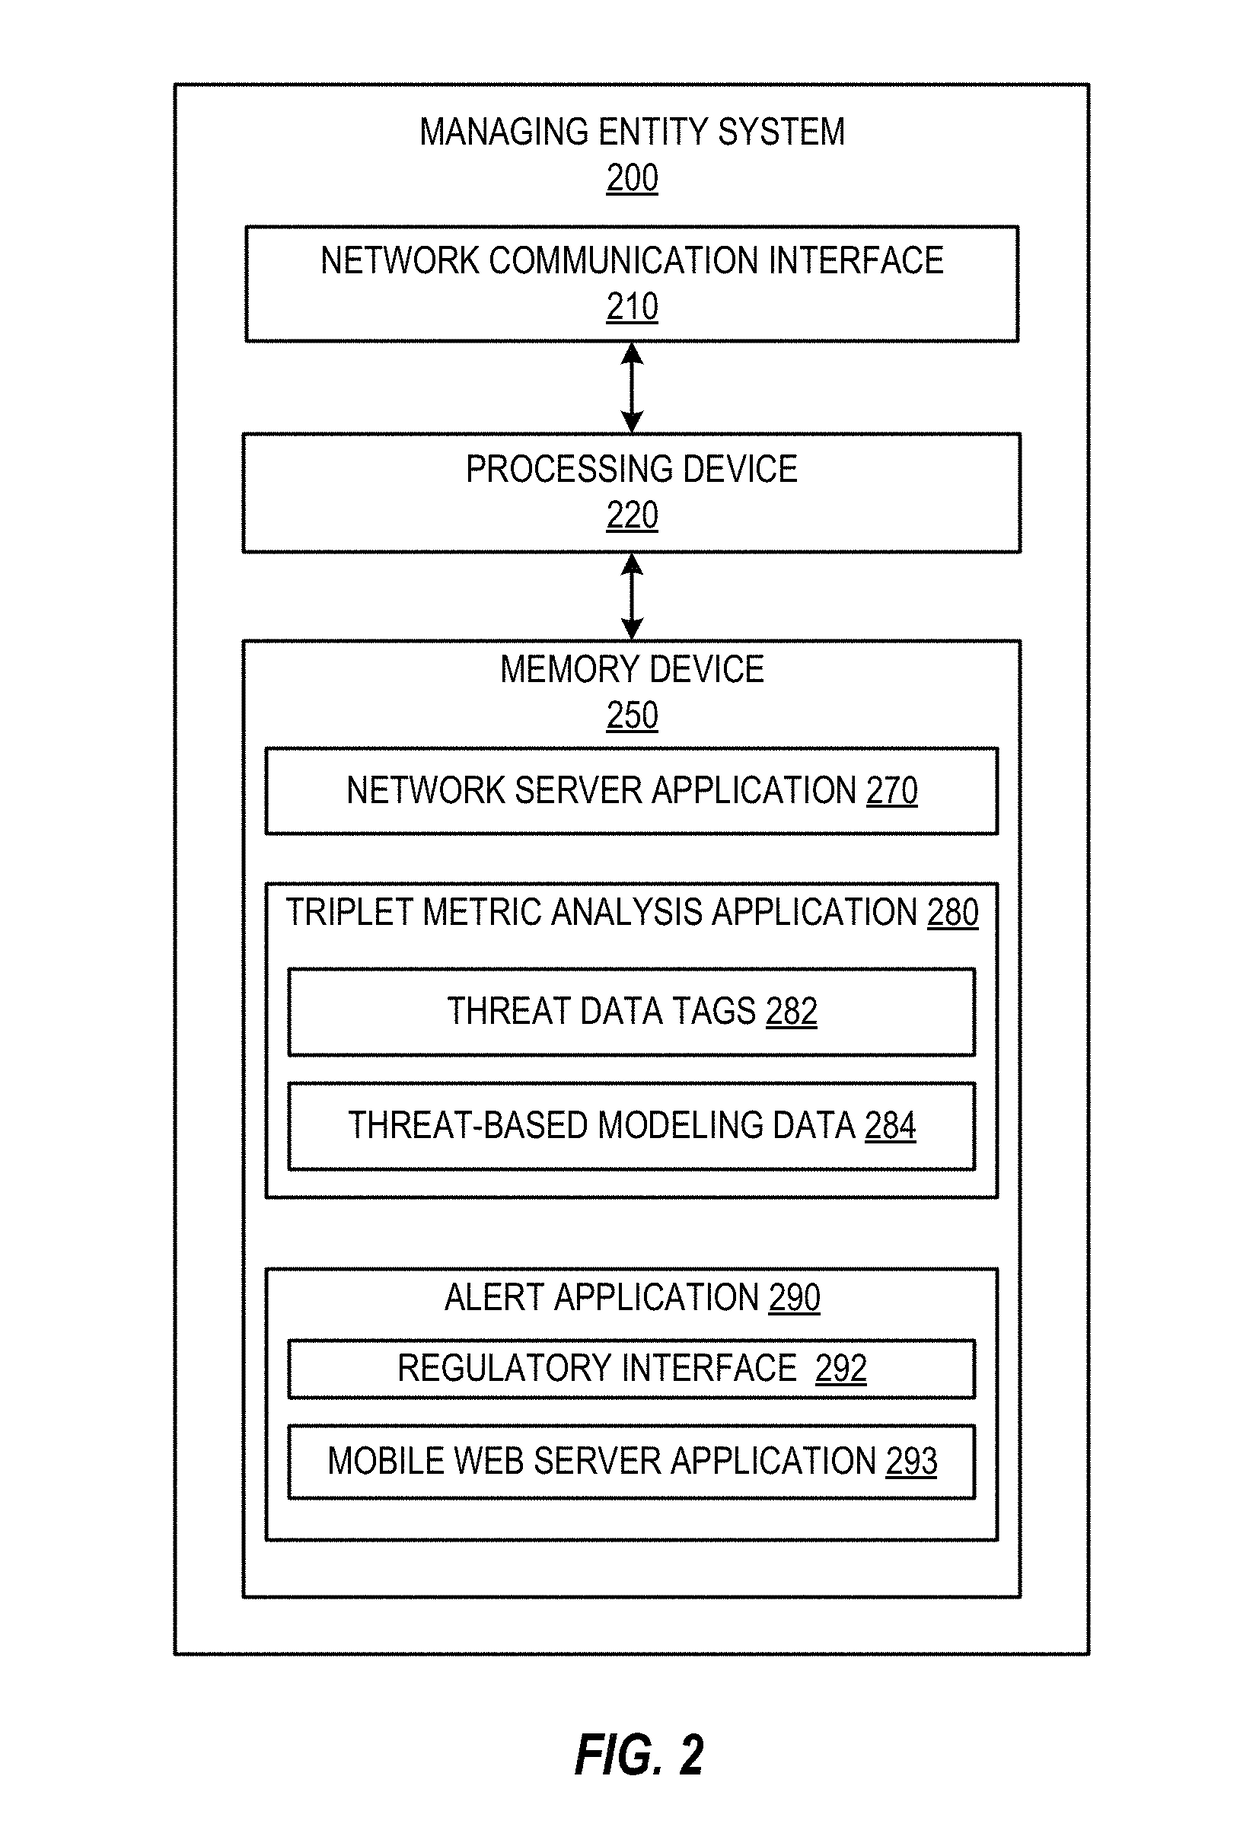 System for monitoring and addressing events based on triplet metric analysis